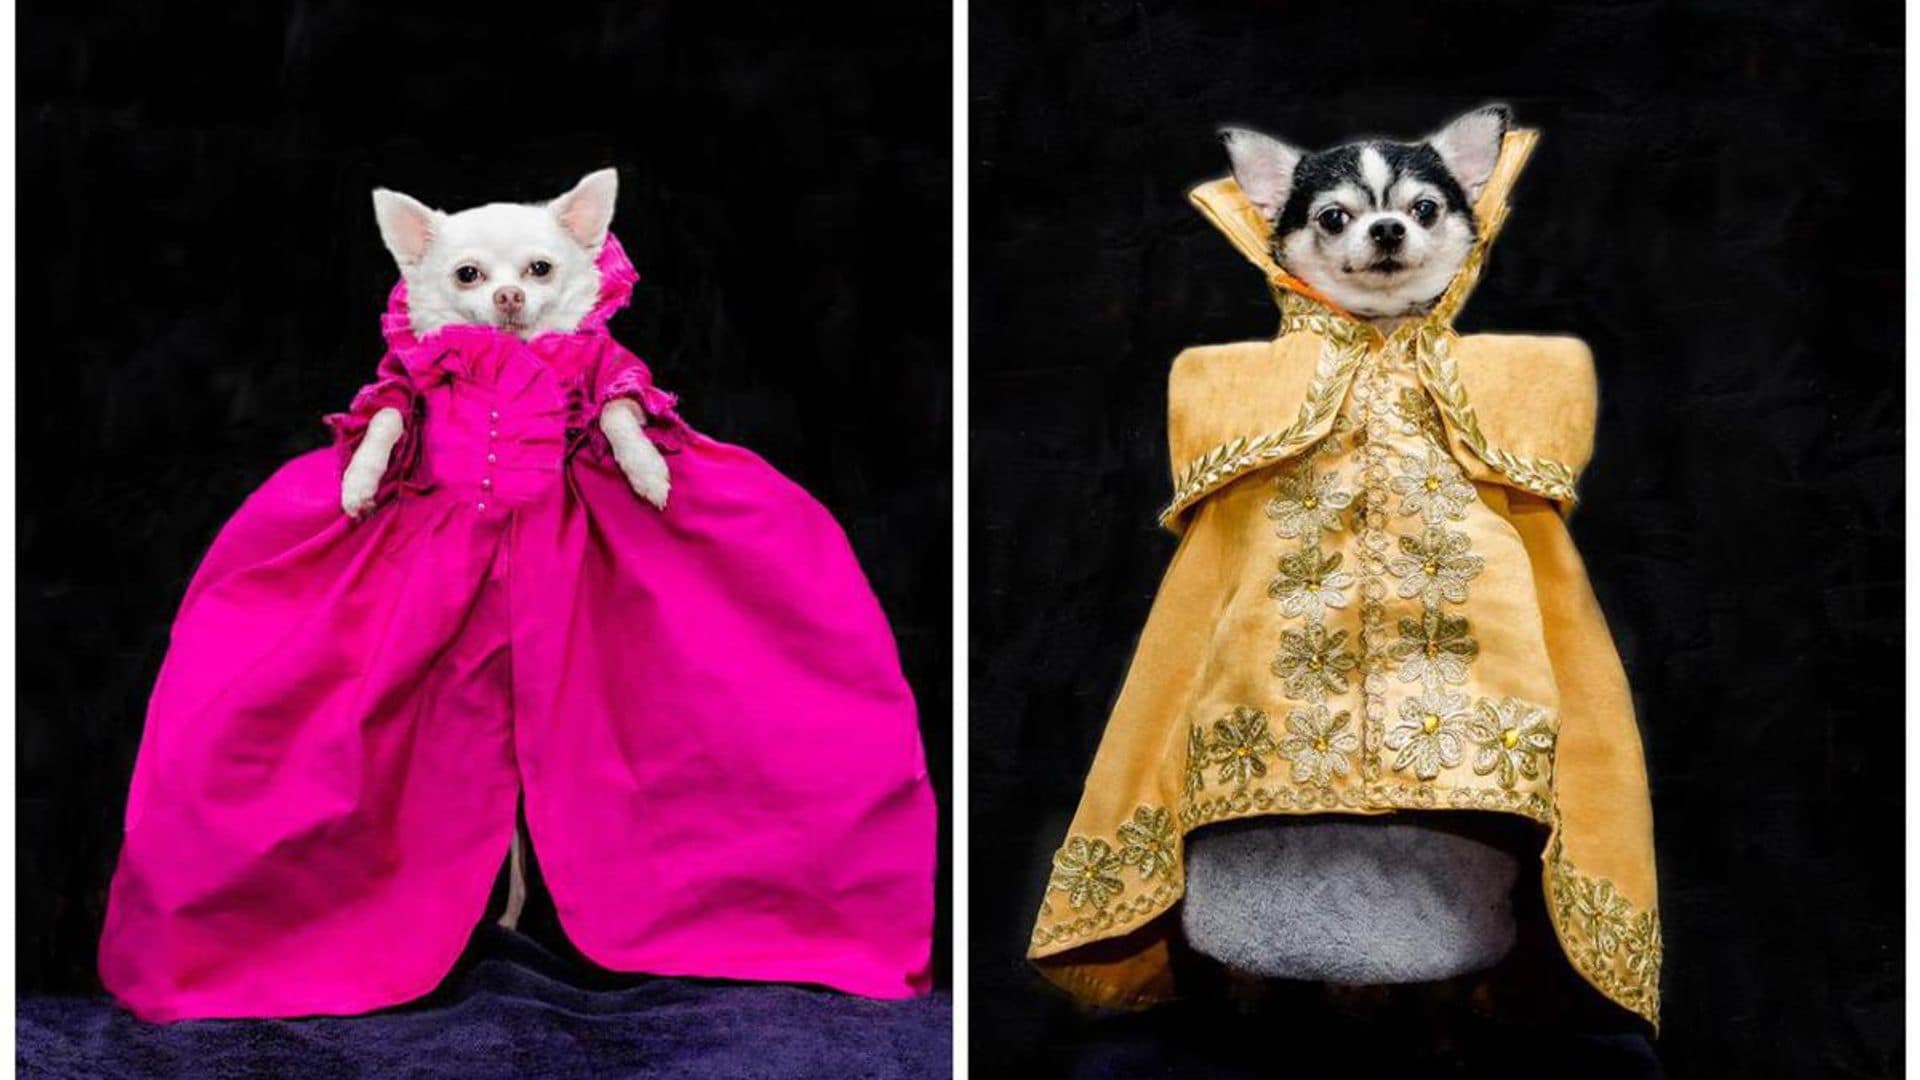 The twin Chihuahuas that wore Met Gala inspired fashion